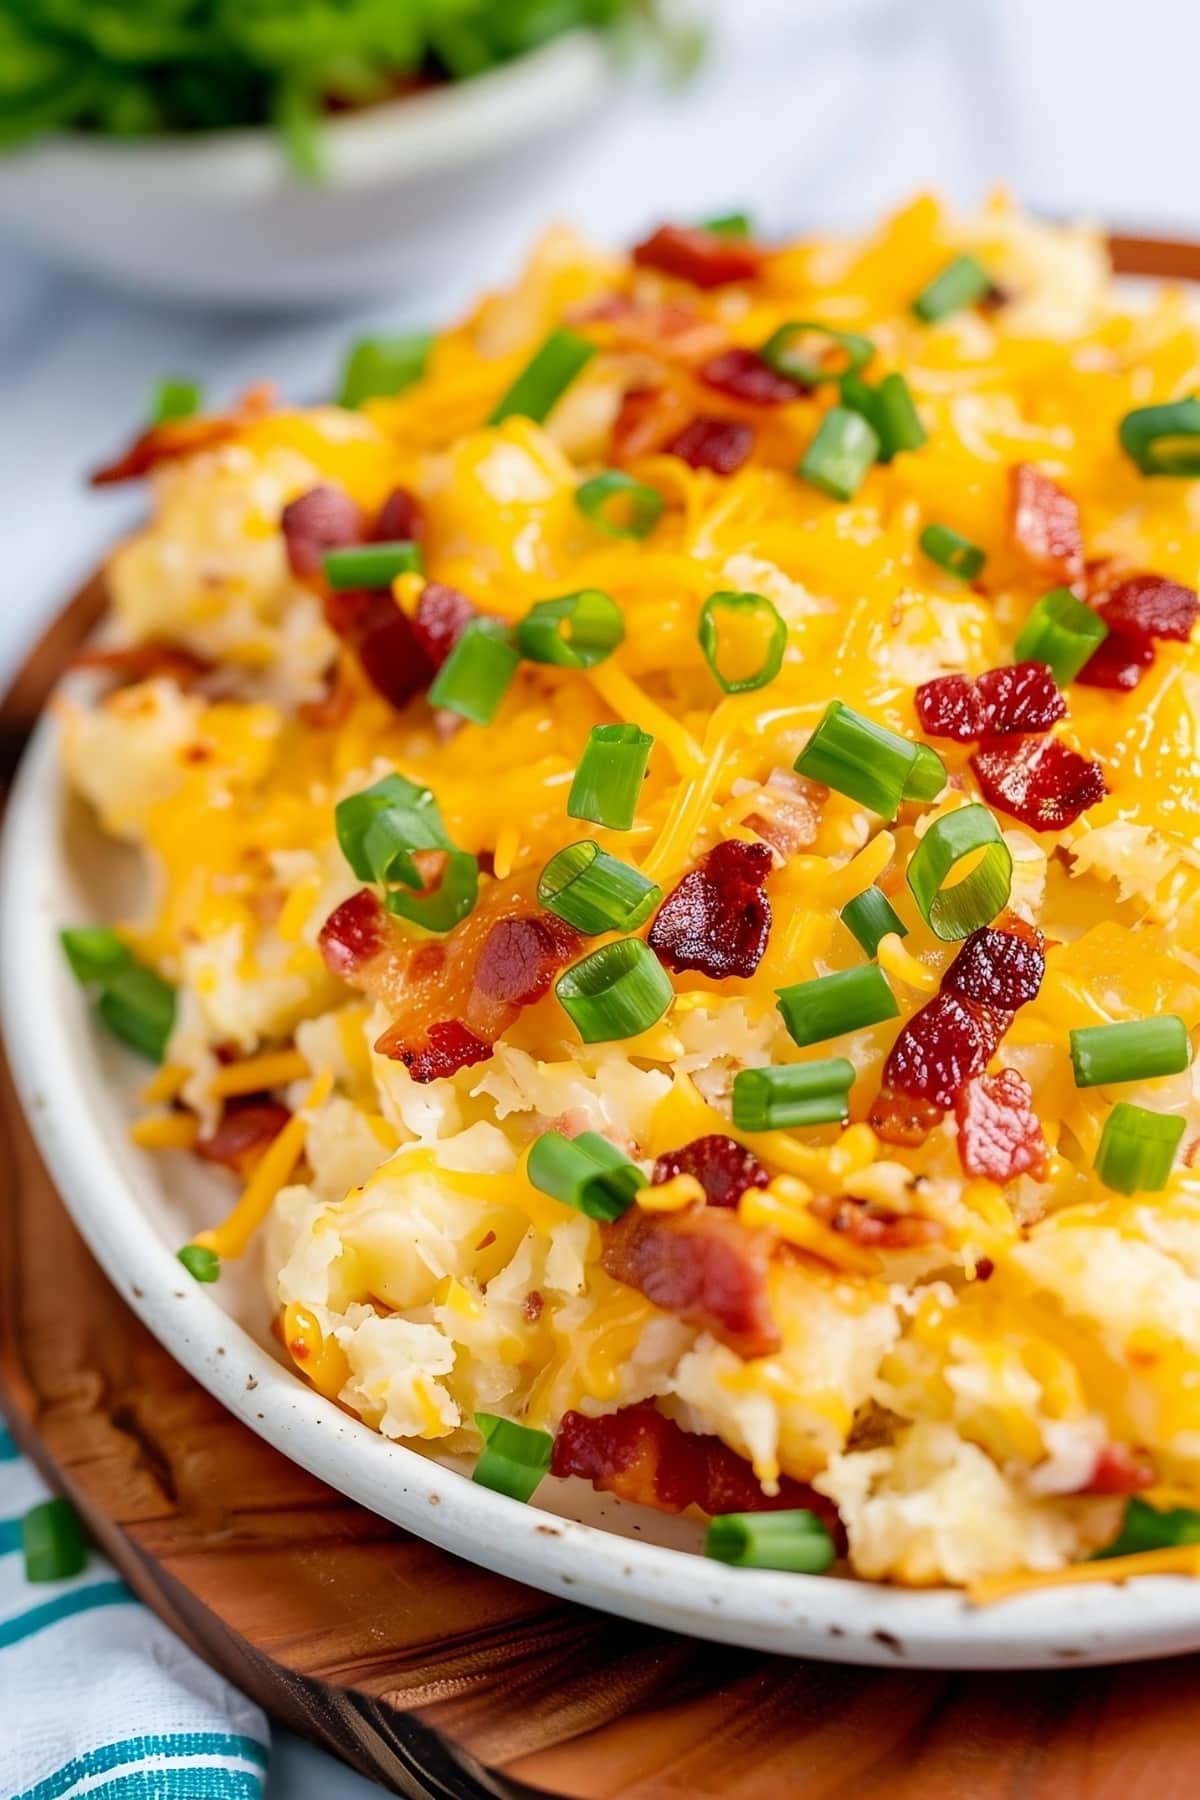 Creamy and delicious crack potatoes with crumbled bacon, cheese and chopped green onions